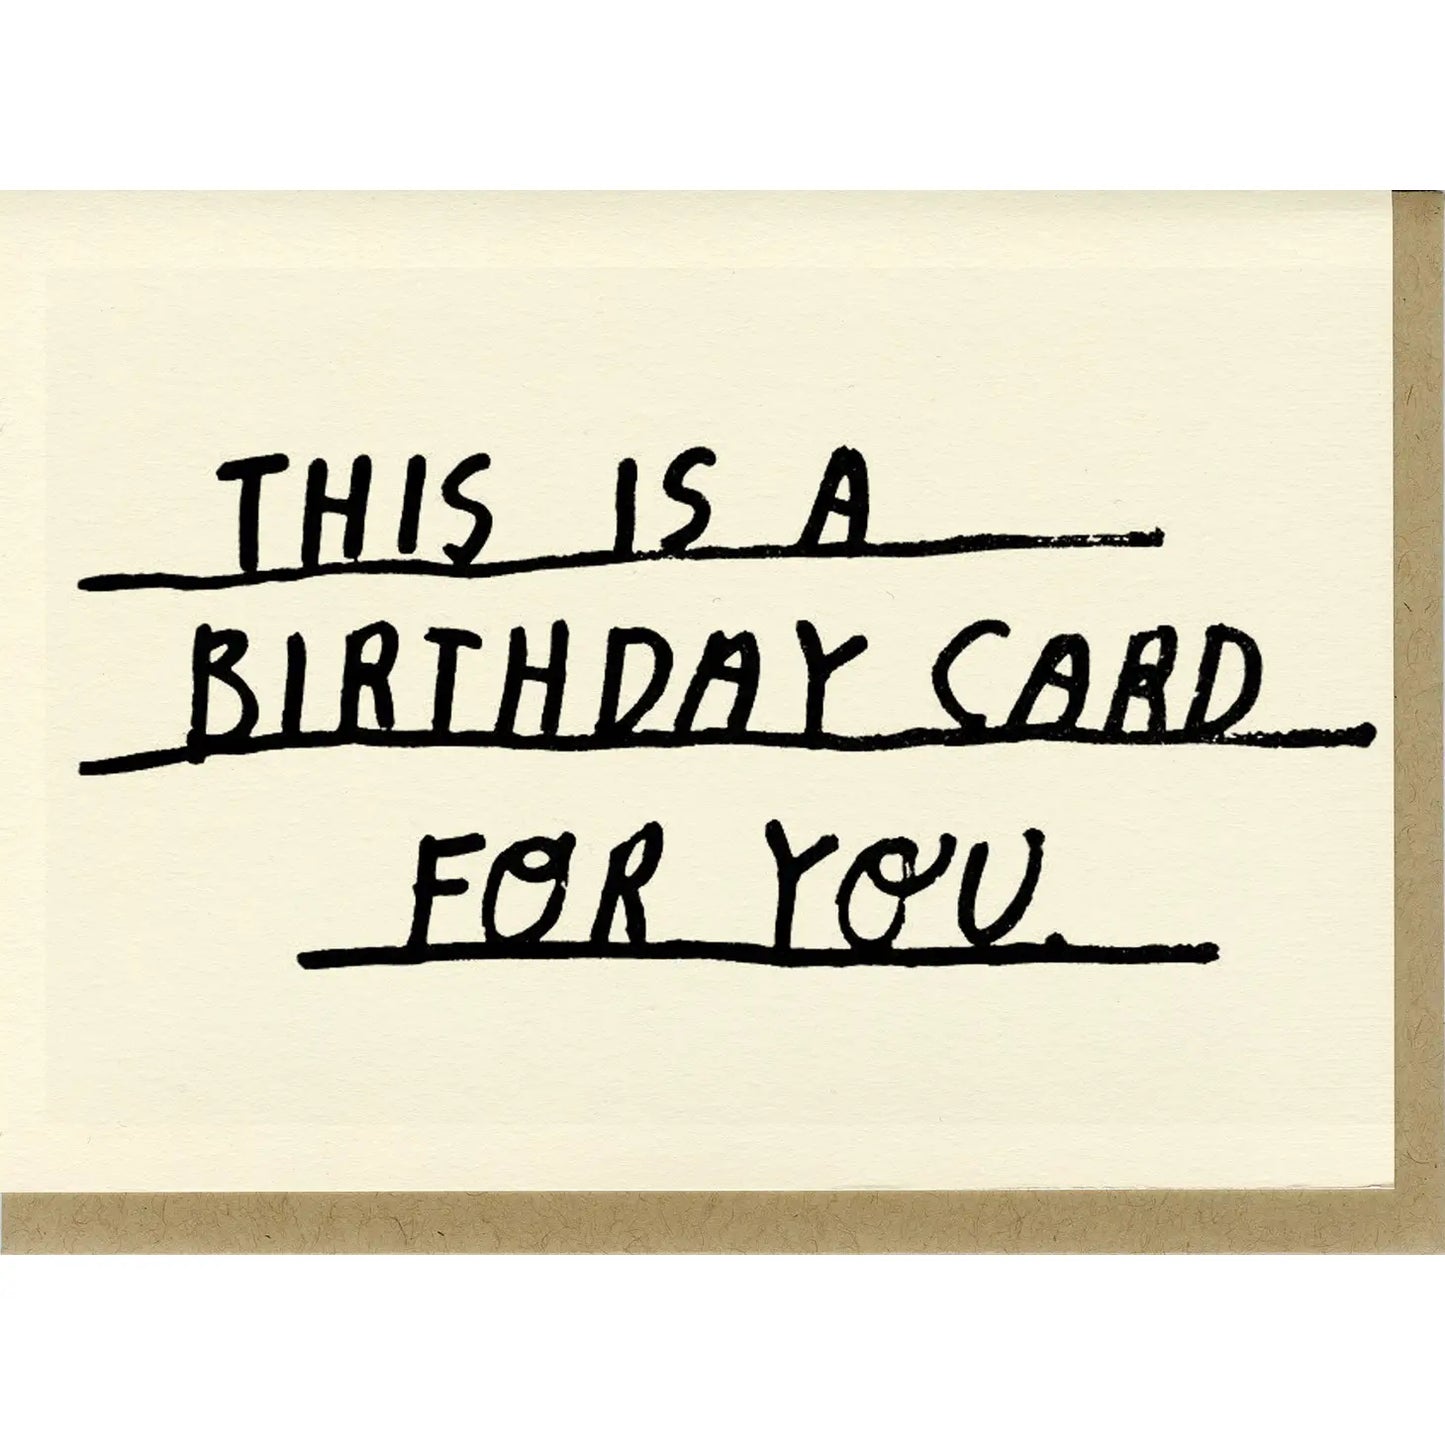 Birthday card for you